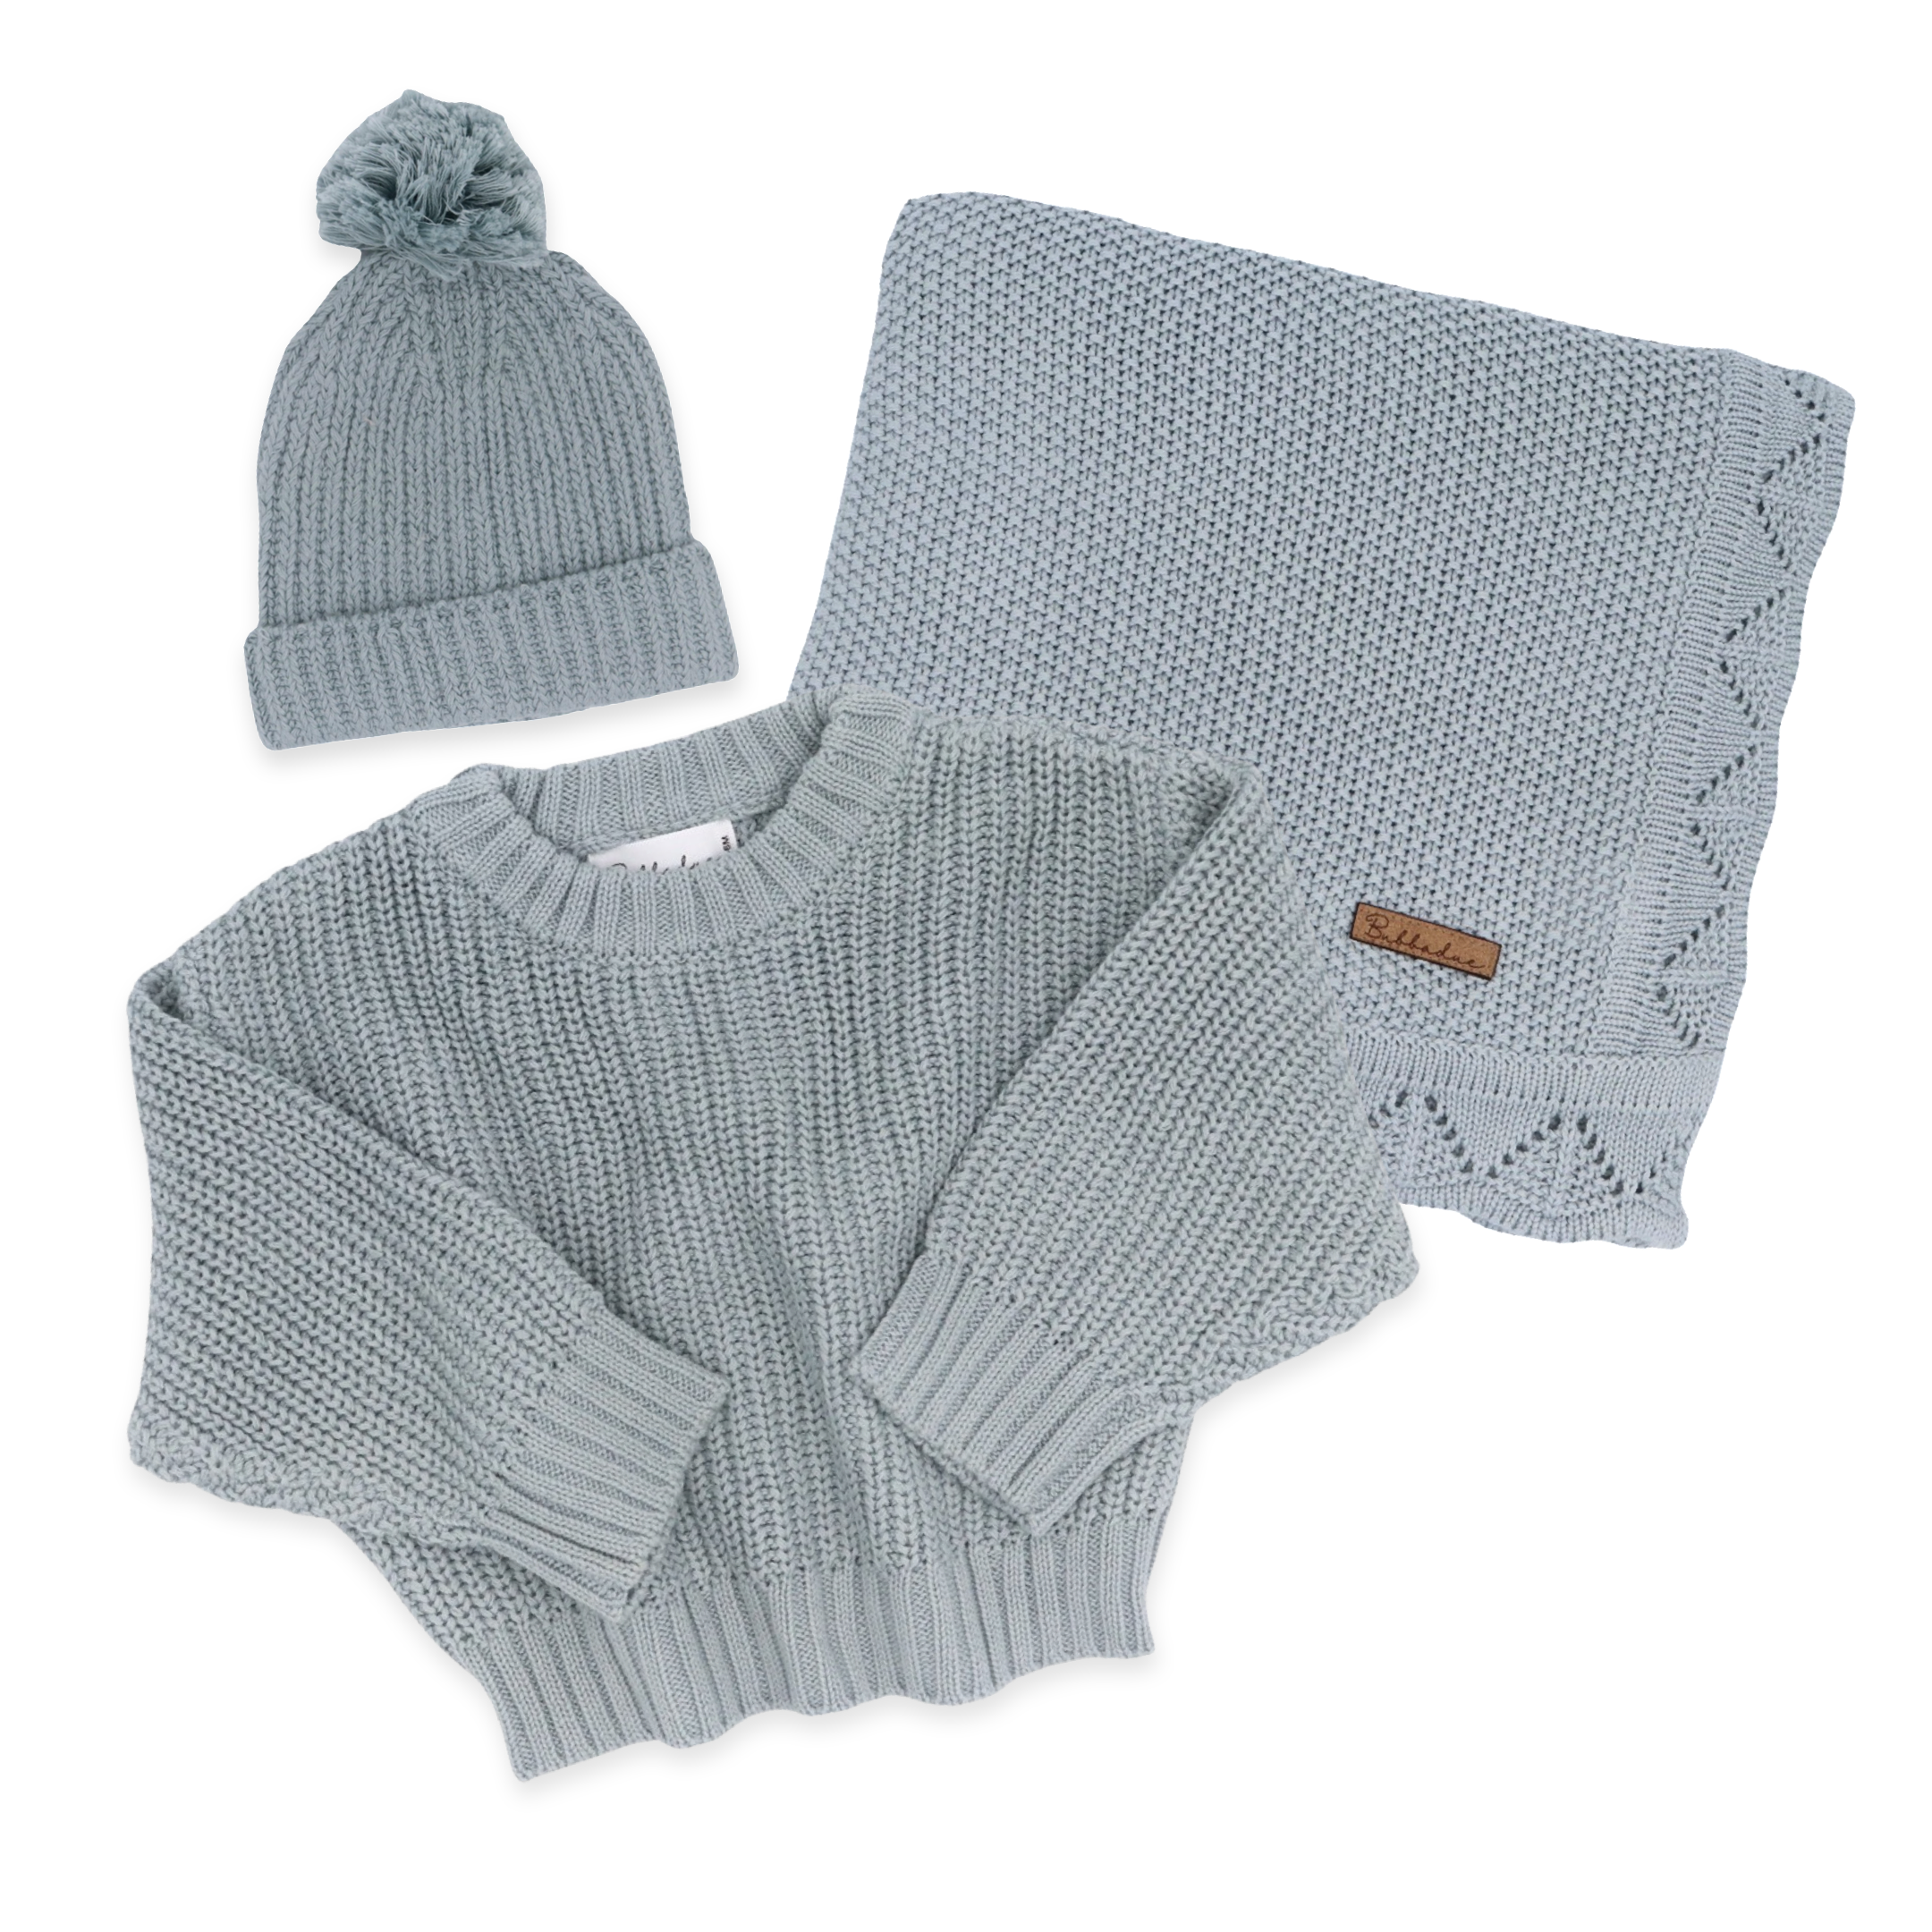 Bubbadue Knitted Baby Jersey, Beanie & Blanket Set - Misty Blue - Bubbadue